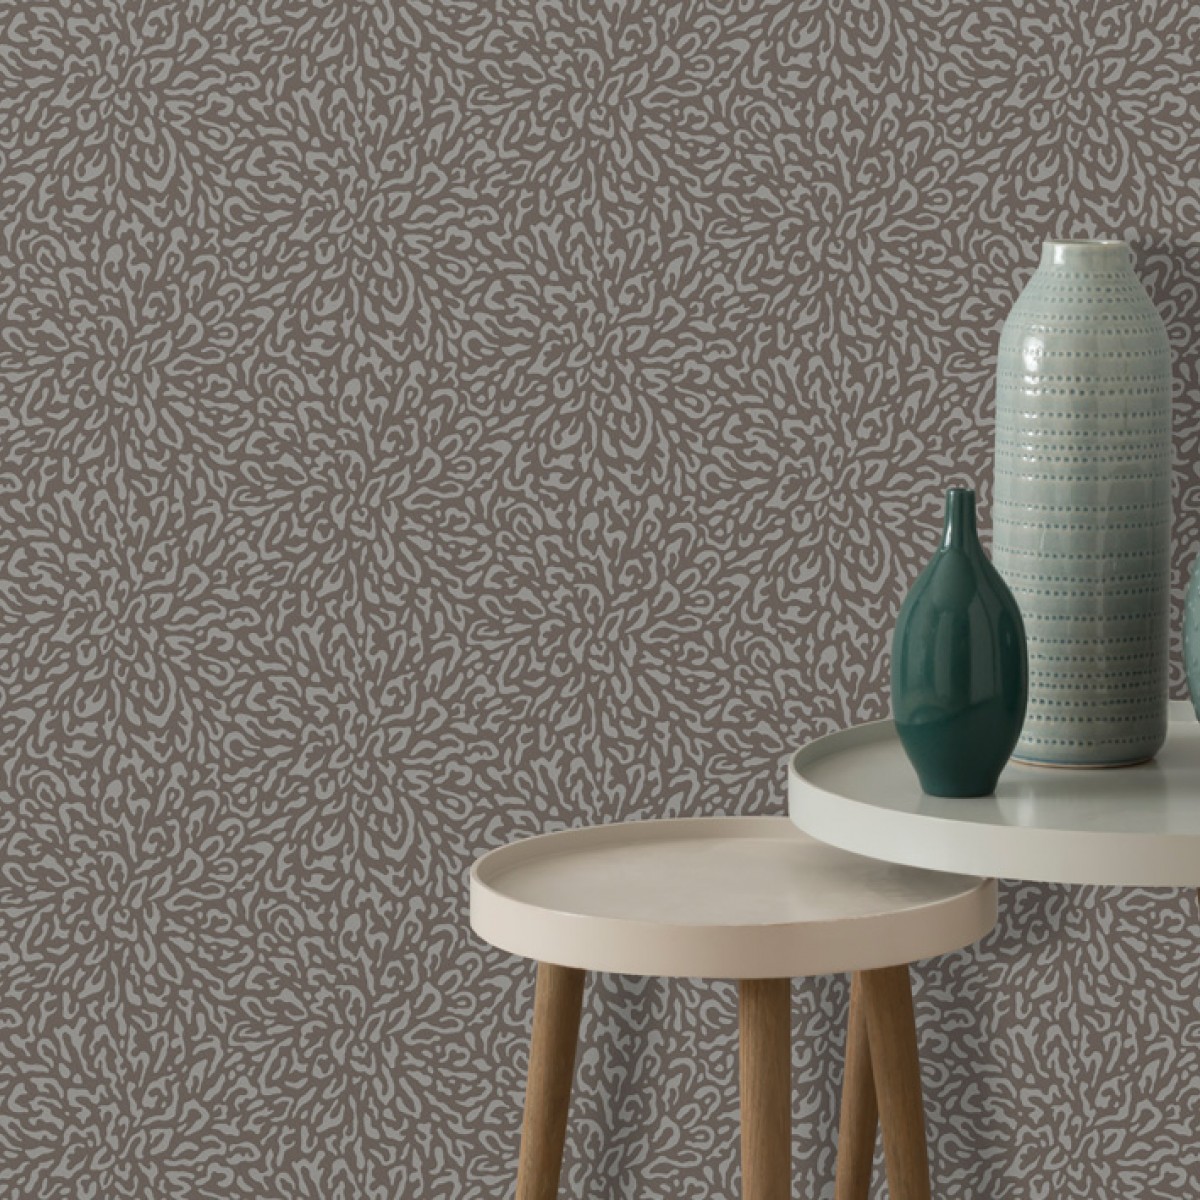 Tapet Corallo, Burnished Brown Luxury Patterned, 1838 Wallcoverings, 5.3mp / rola, Tapet living 